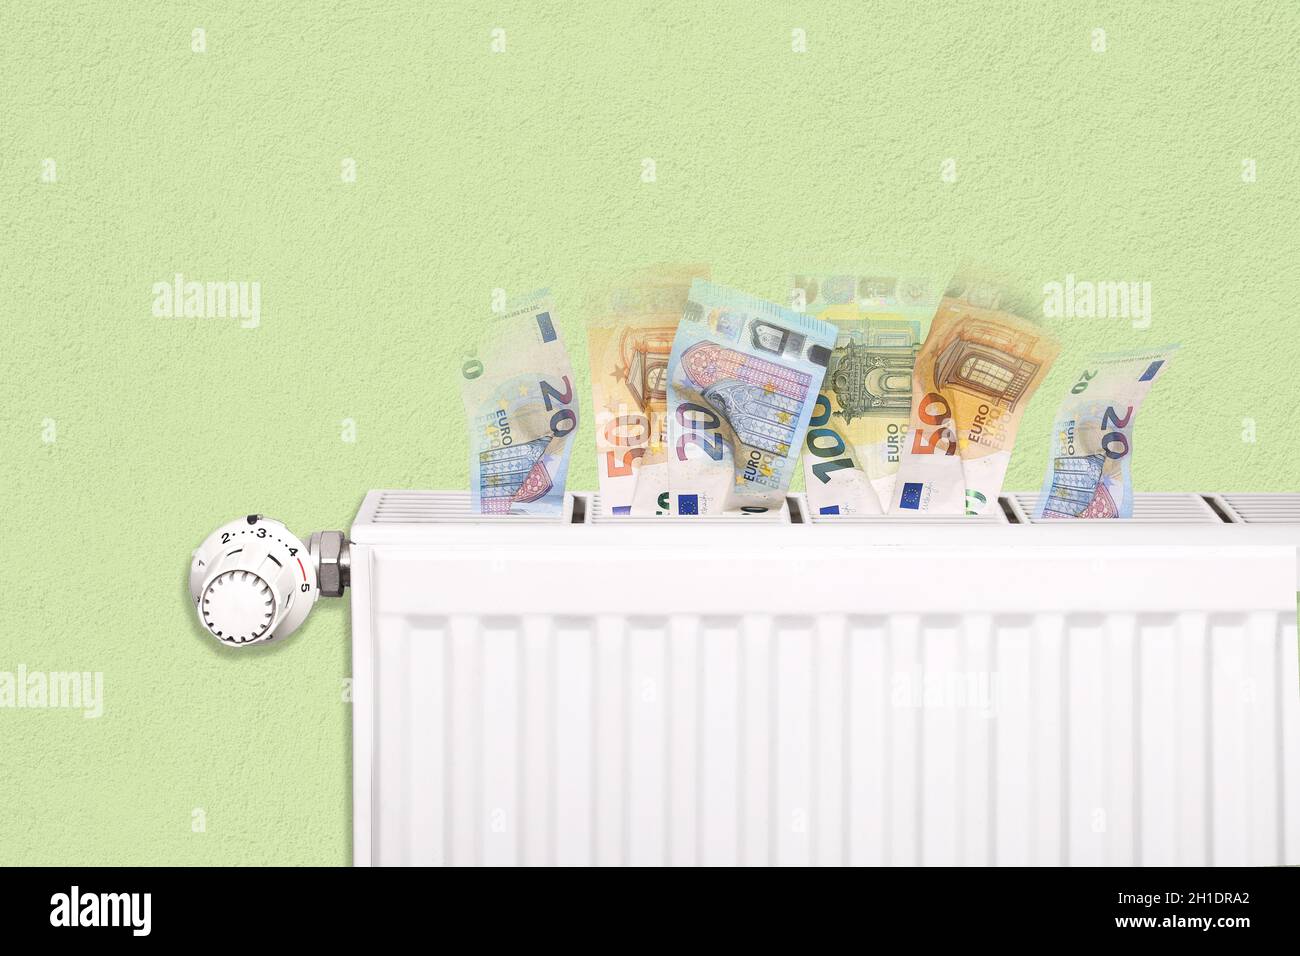 Symbolic image for steadily rising heating costs Stock Photo